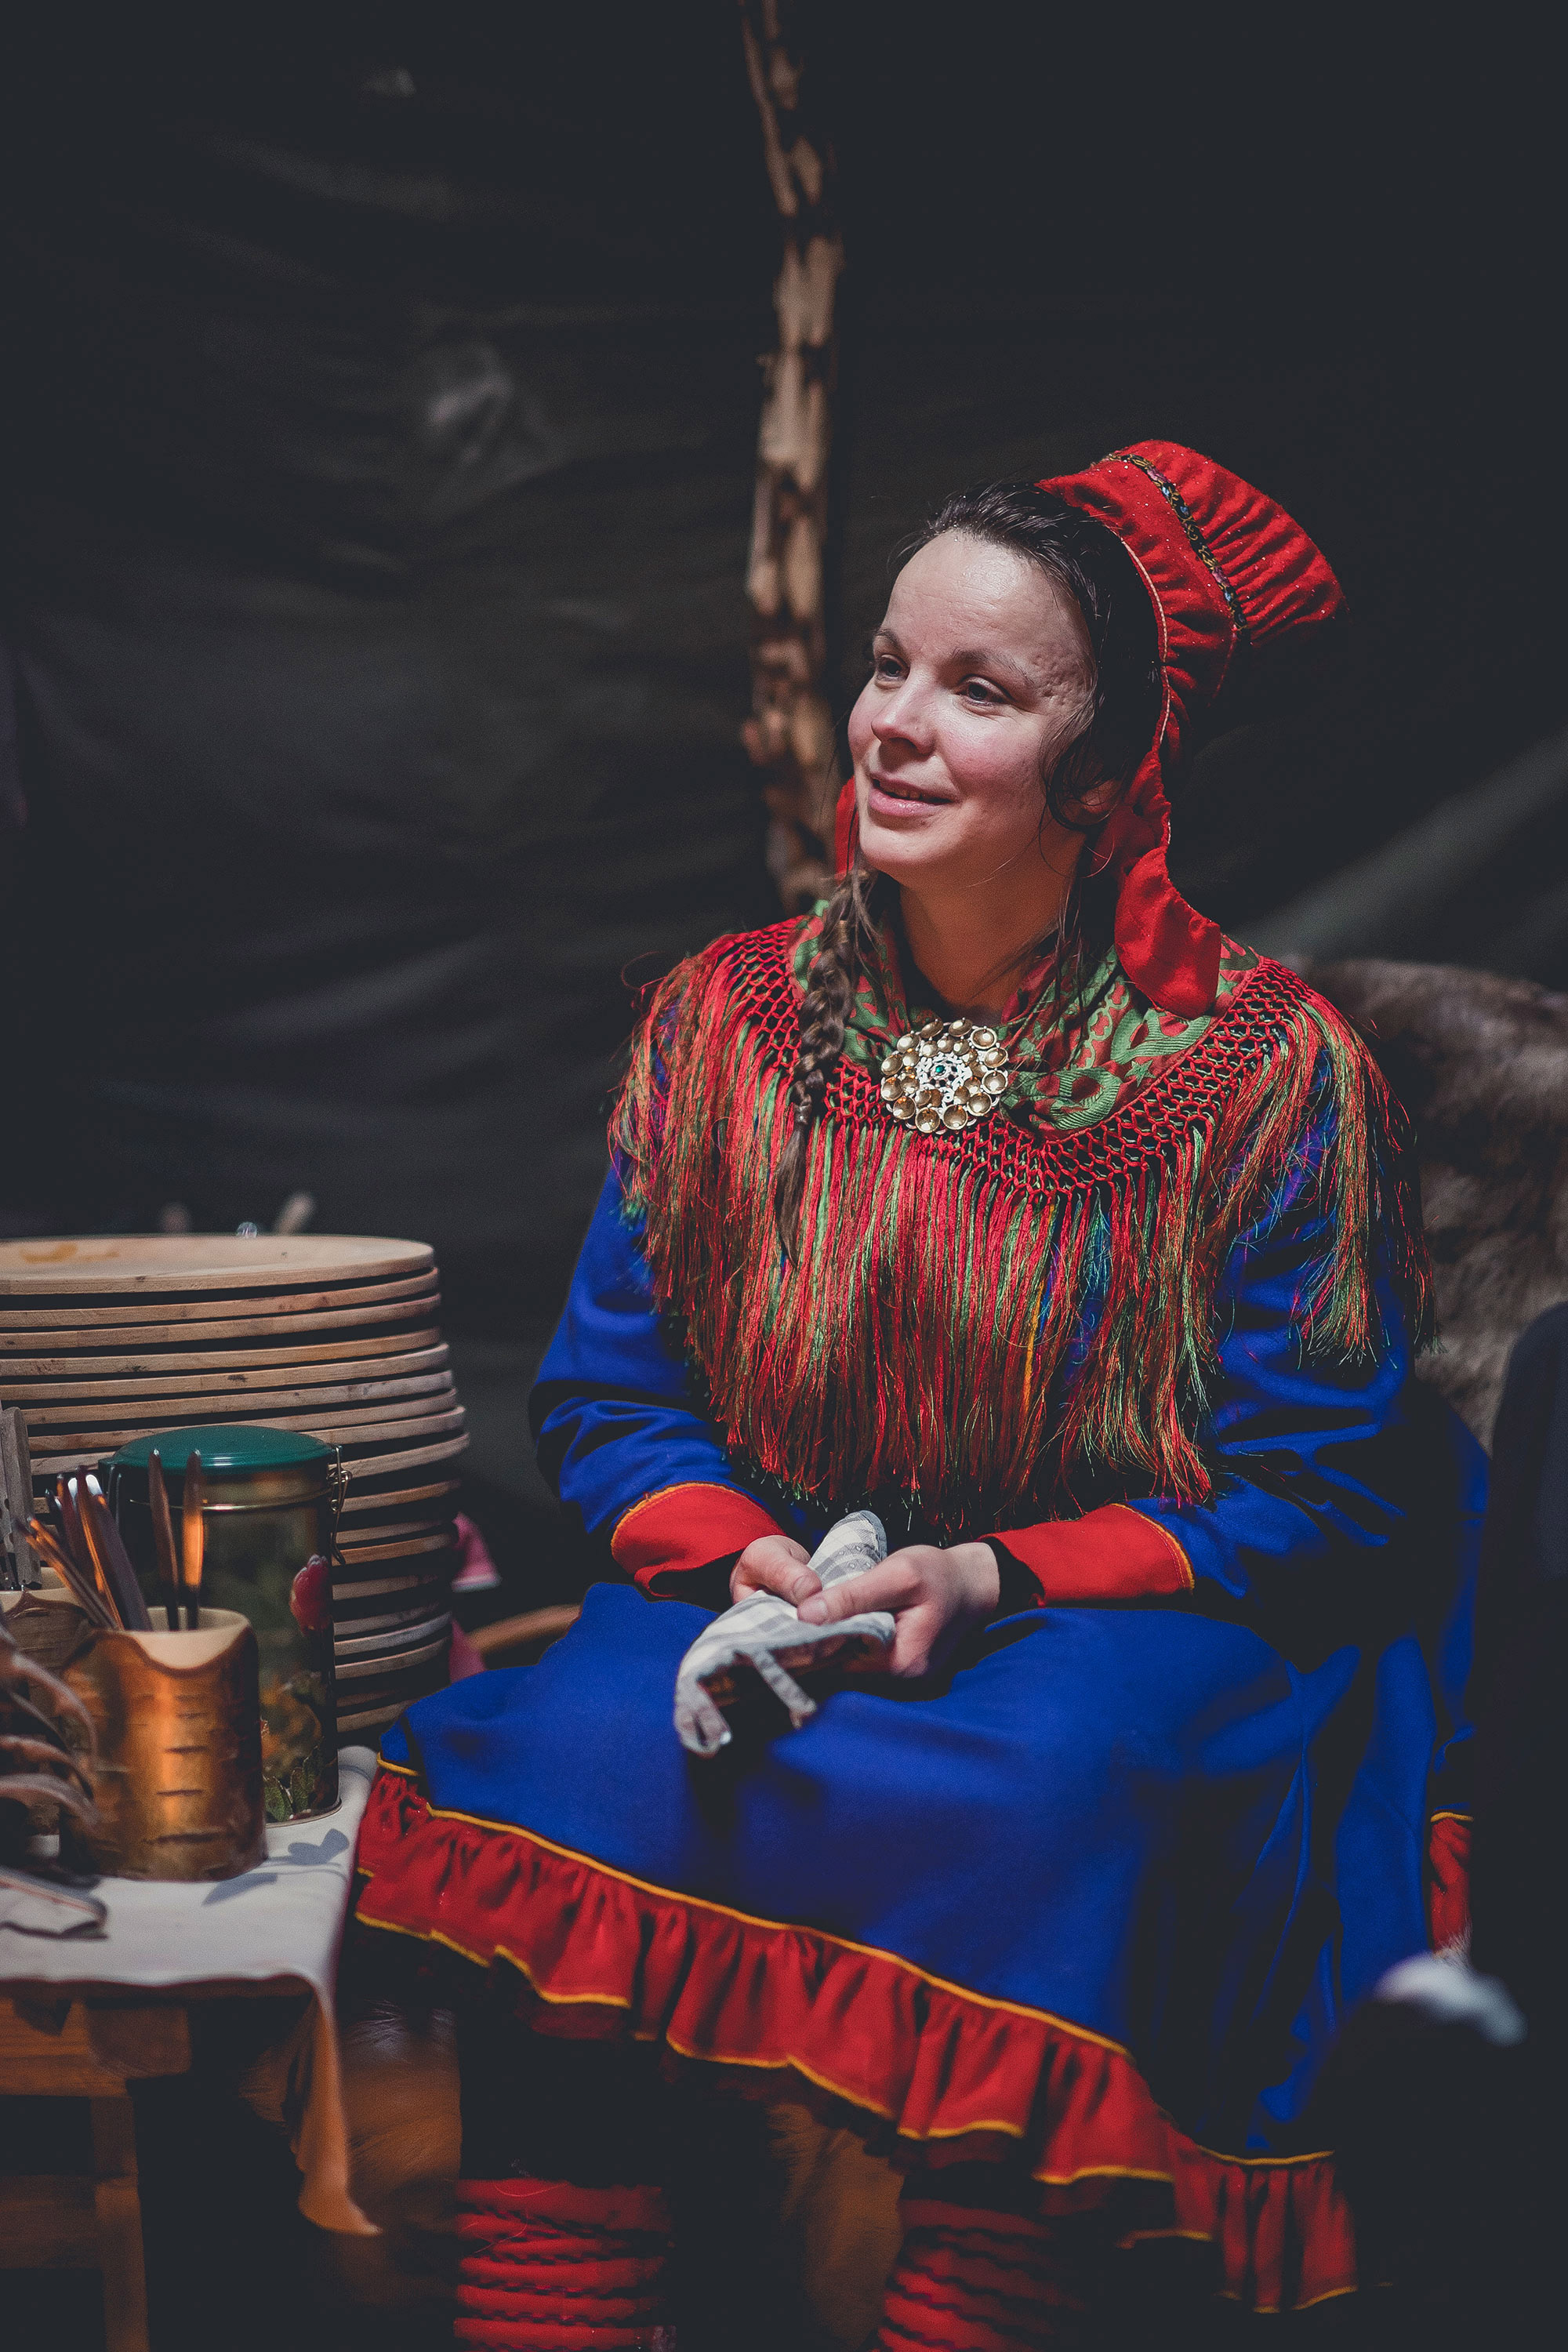 A Sami woman in traditional costume inside her tent